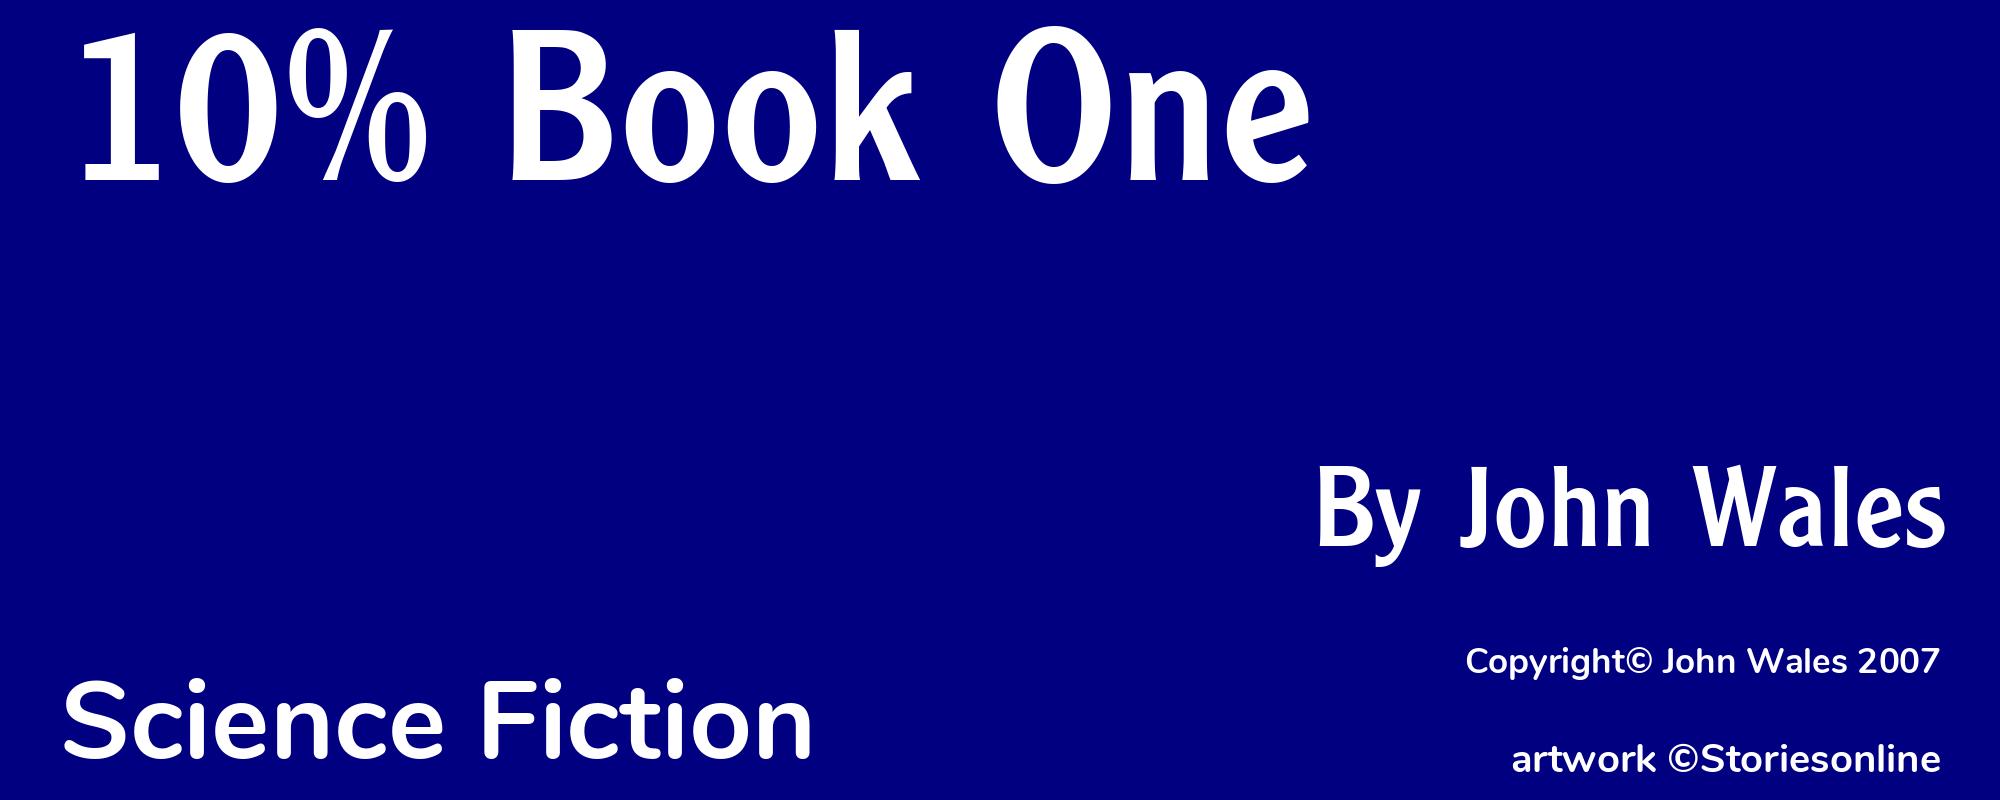 10% Book One - Cover